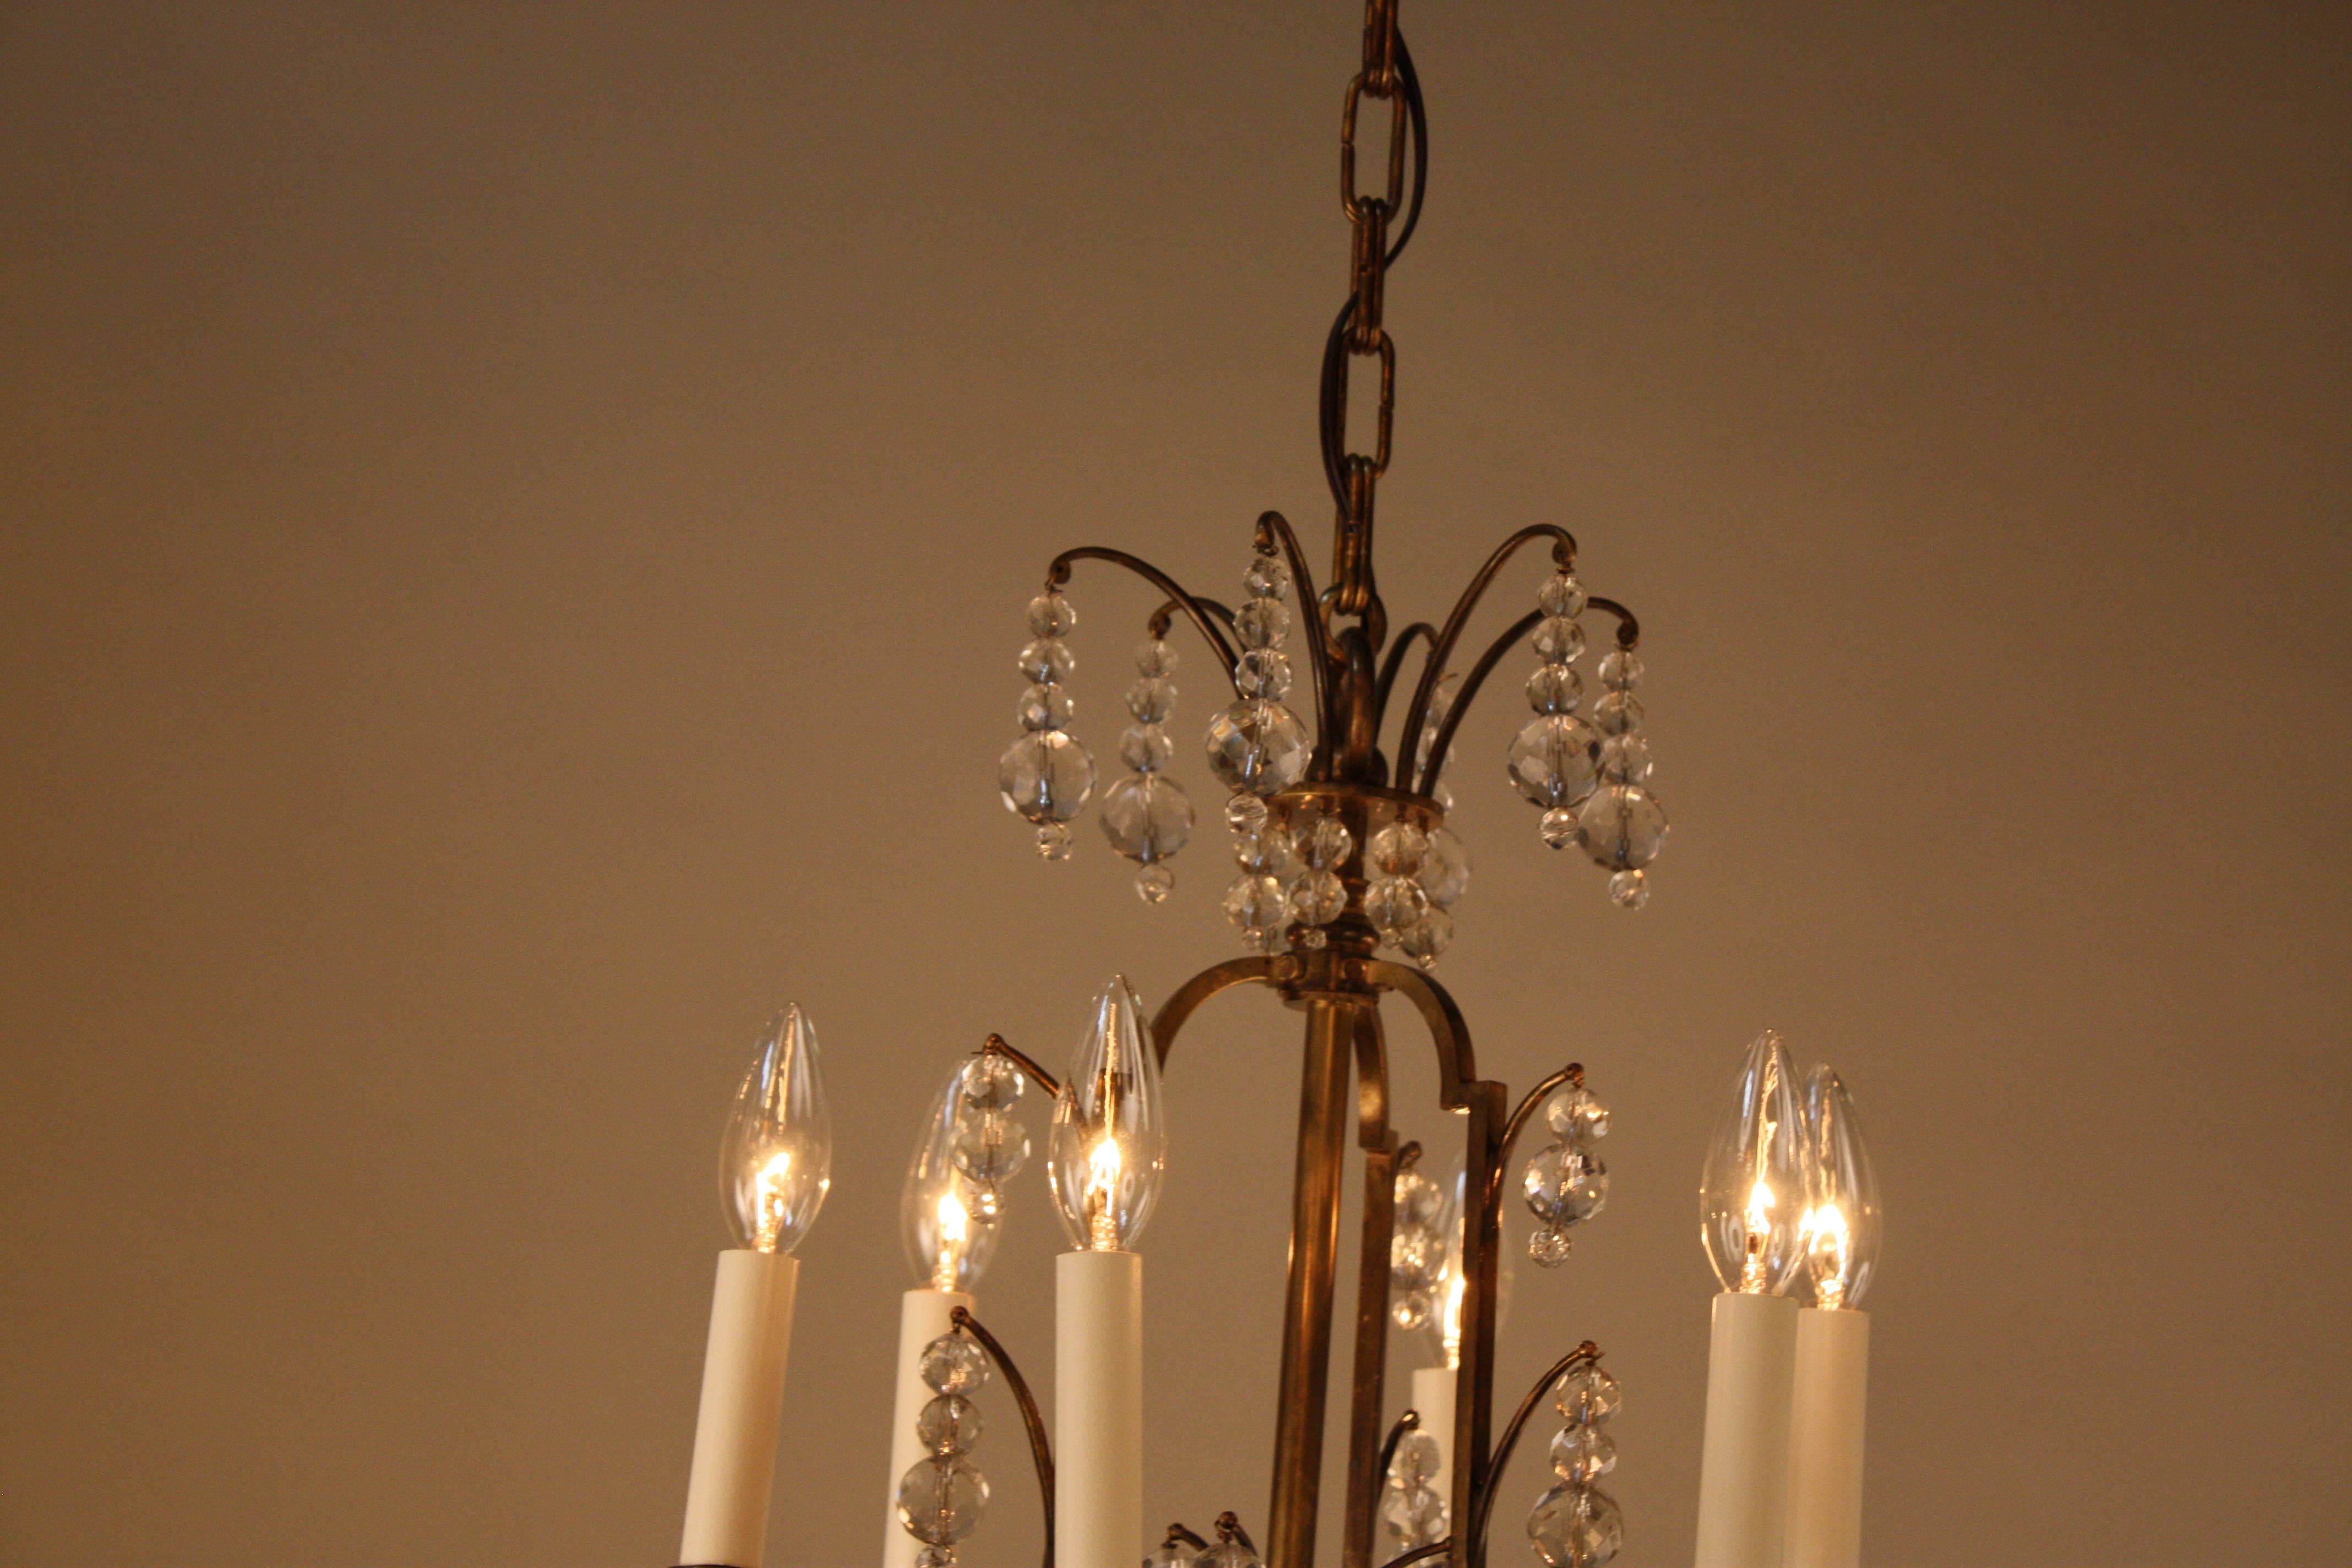 When you talk about chandeliers, you talk about jewelry for your special room and this teardrop crystal and six-light bronze chandelier will bring sparkles to any room.